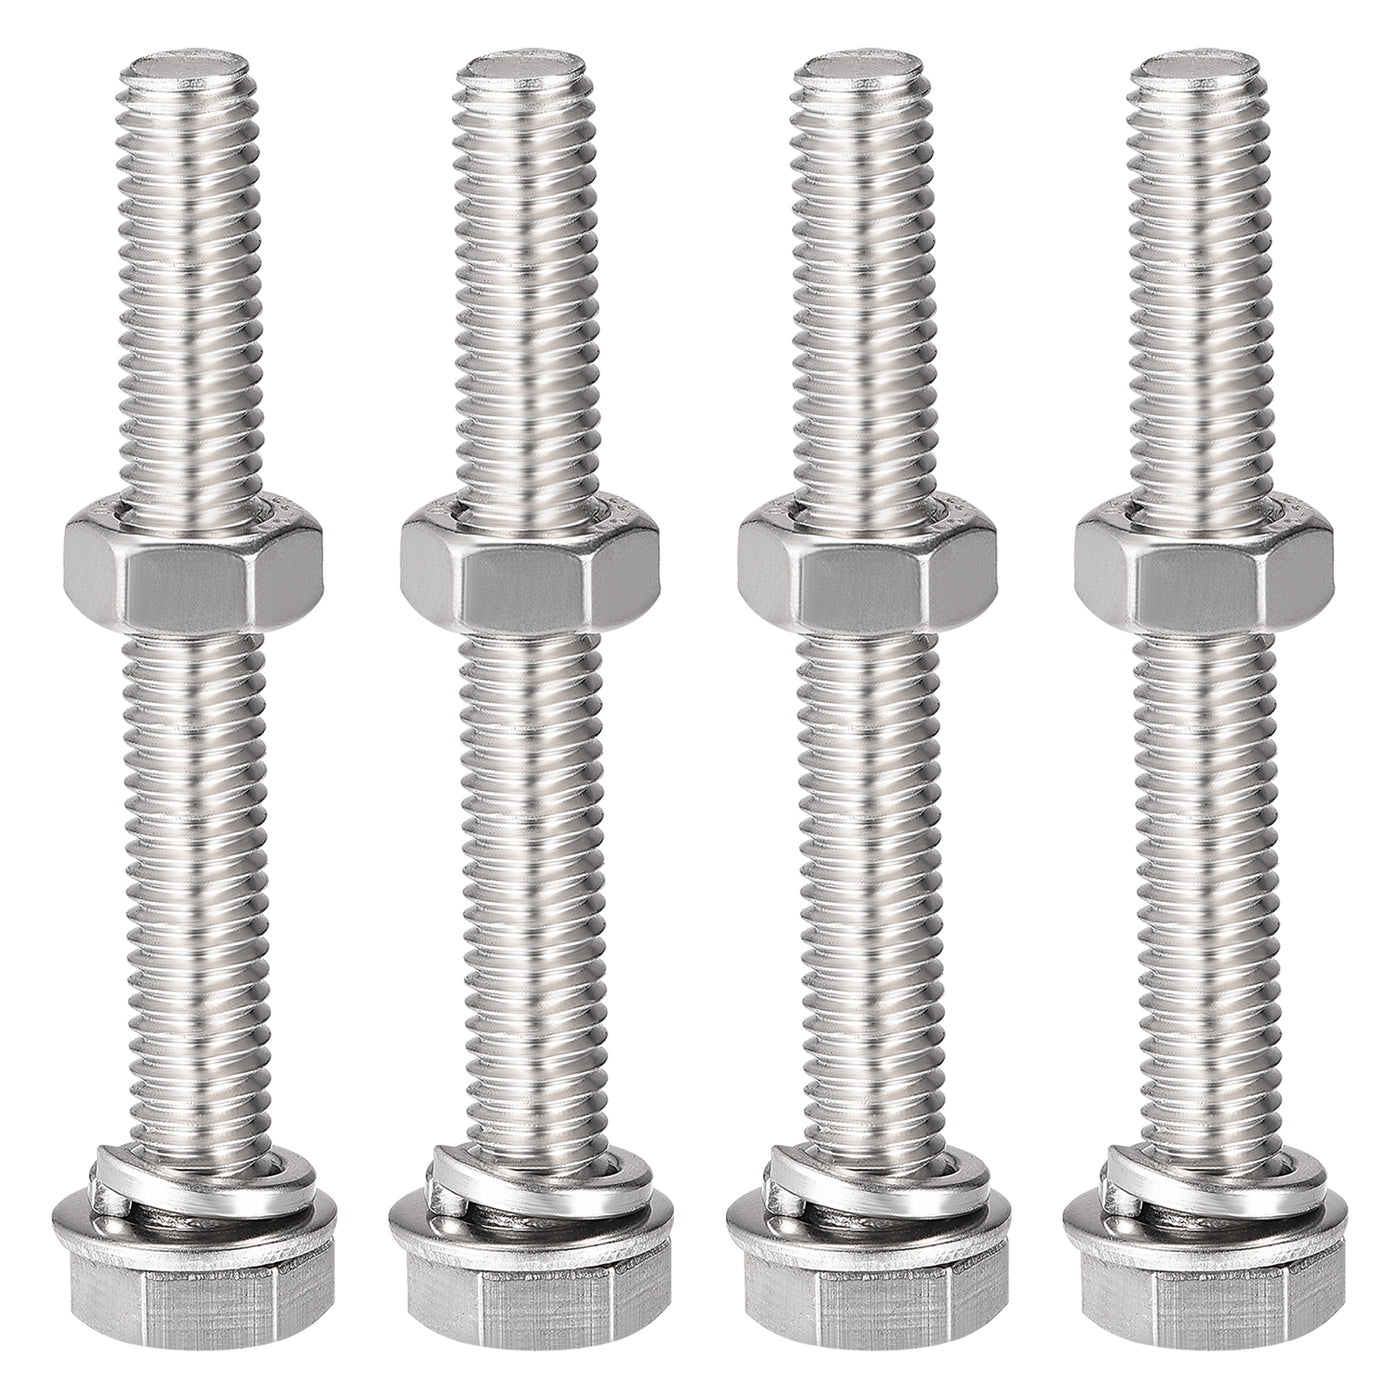 uxcell Uxcell Hex Head Screws Bolts, Nuts, Flat & Lock Washers Kits, 304 Stainless Steel Fully Thread Hexagon Bolts 4 Sets